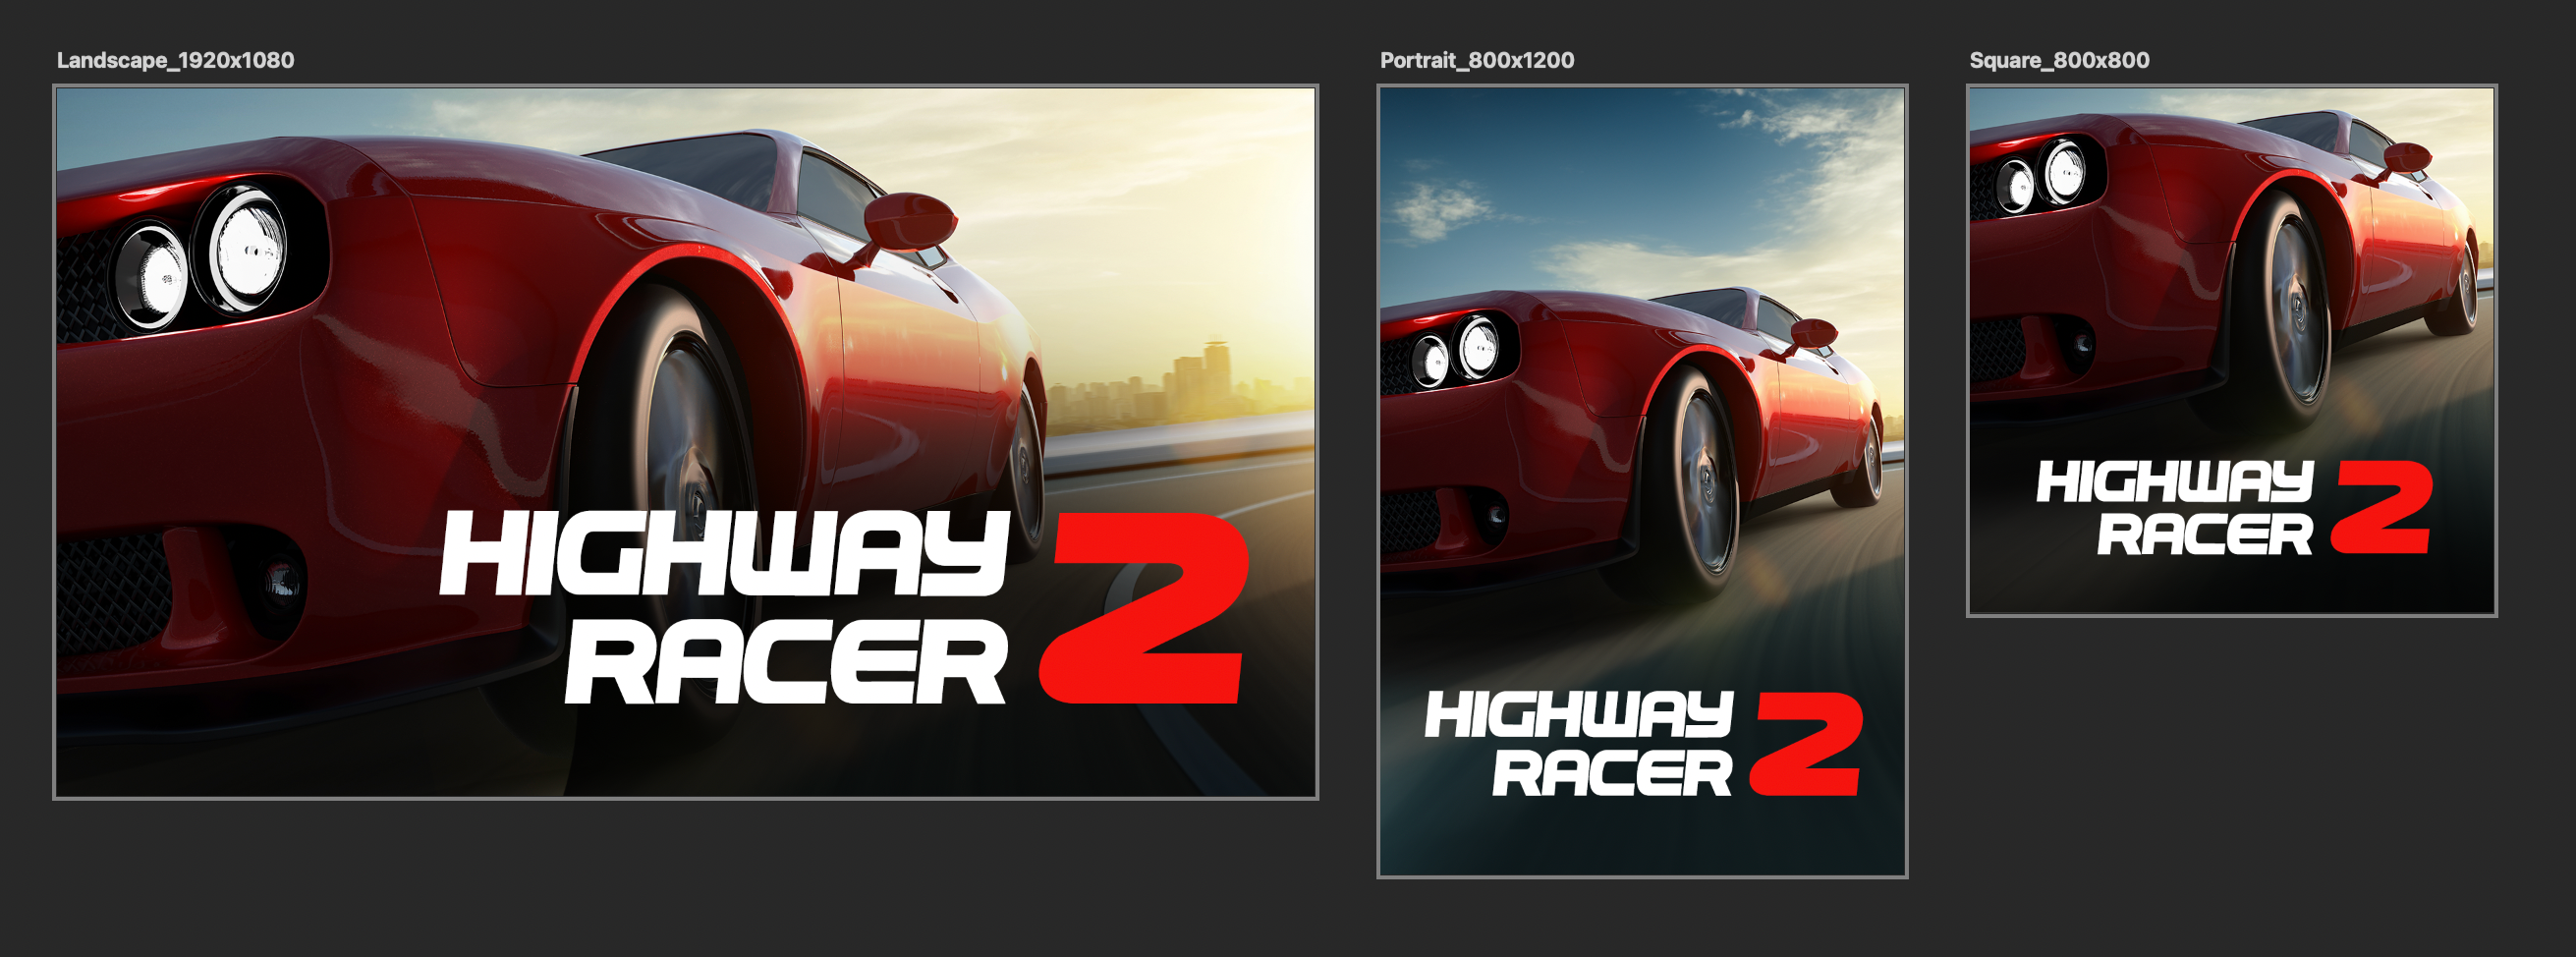 Highway Racer 2 covers